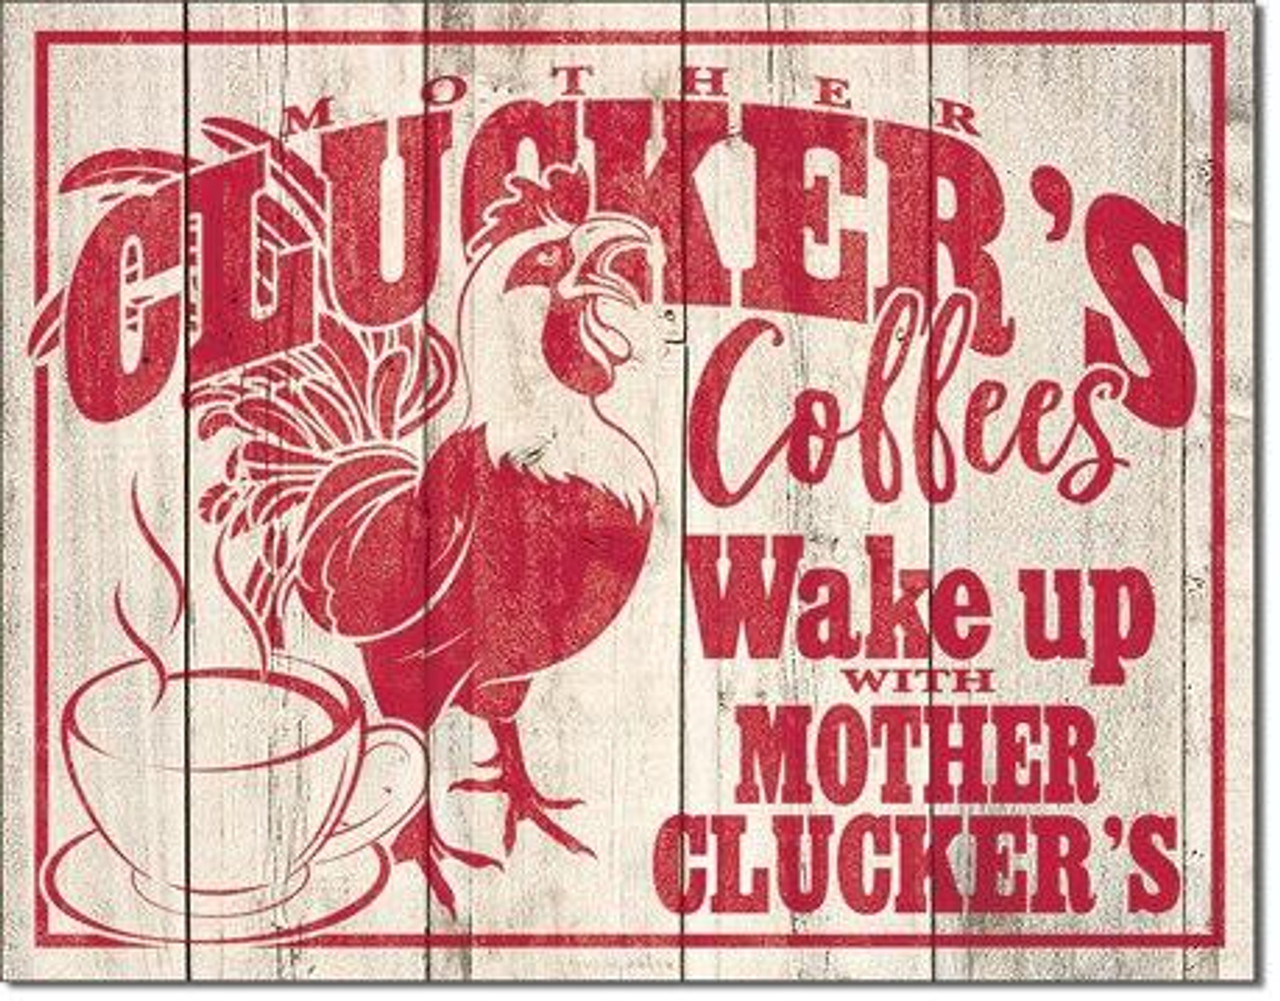 Cluckers Coffees
Brand: N/A
Sign Material: Tin sign
Sign Size: 16"Wx12.5"H
Print Layout: Horizontal/Landscape
Made In: U.S.A

Proudly & Always Will be AMERICAN Made!